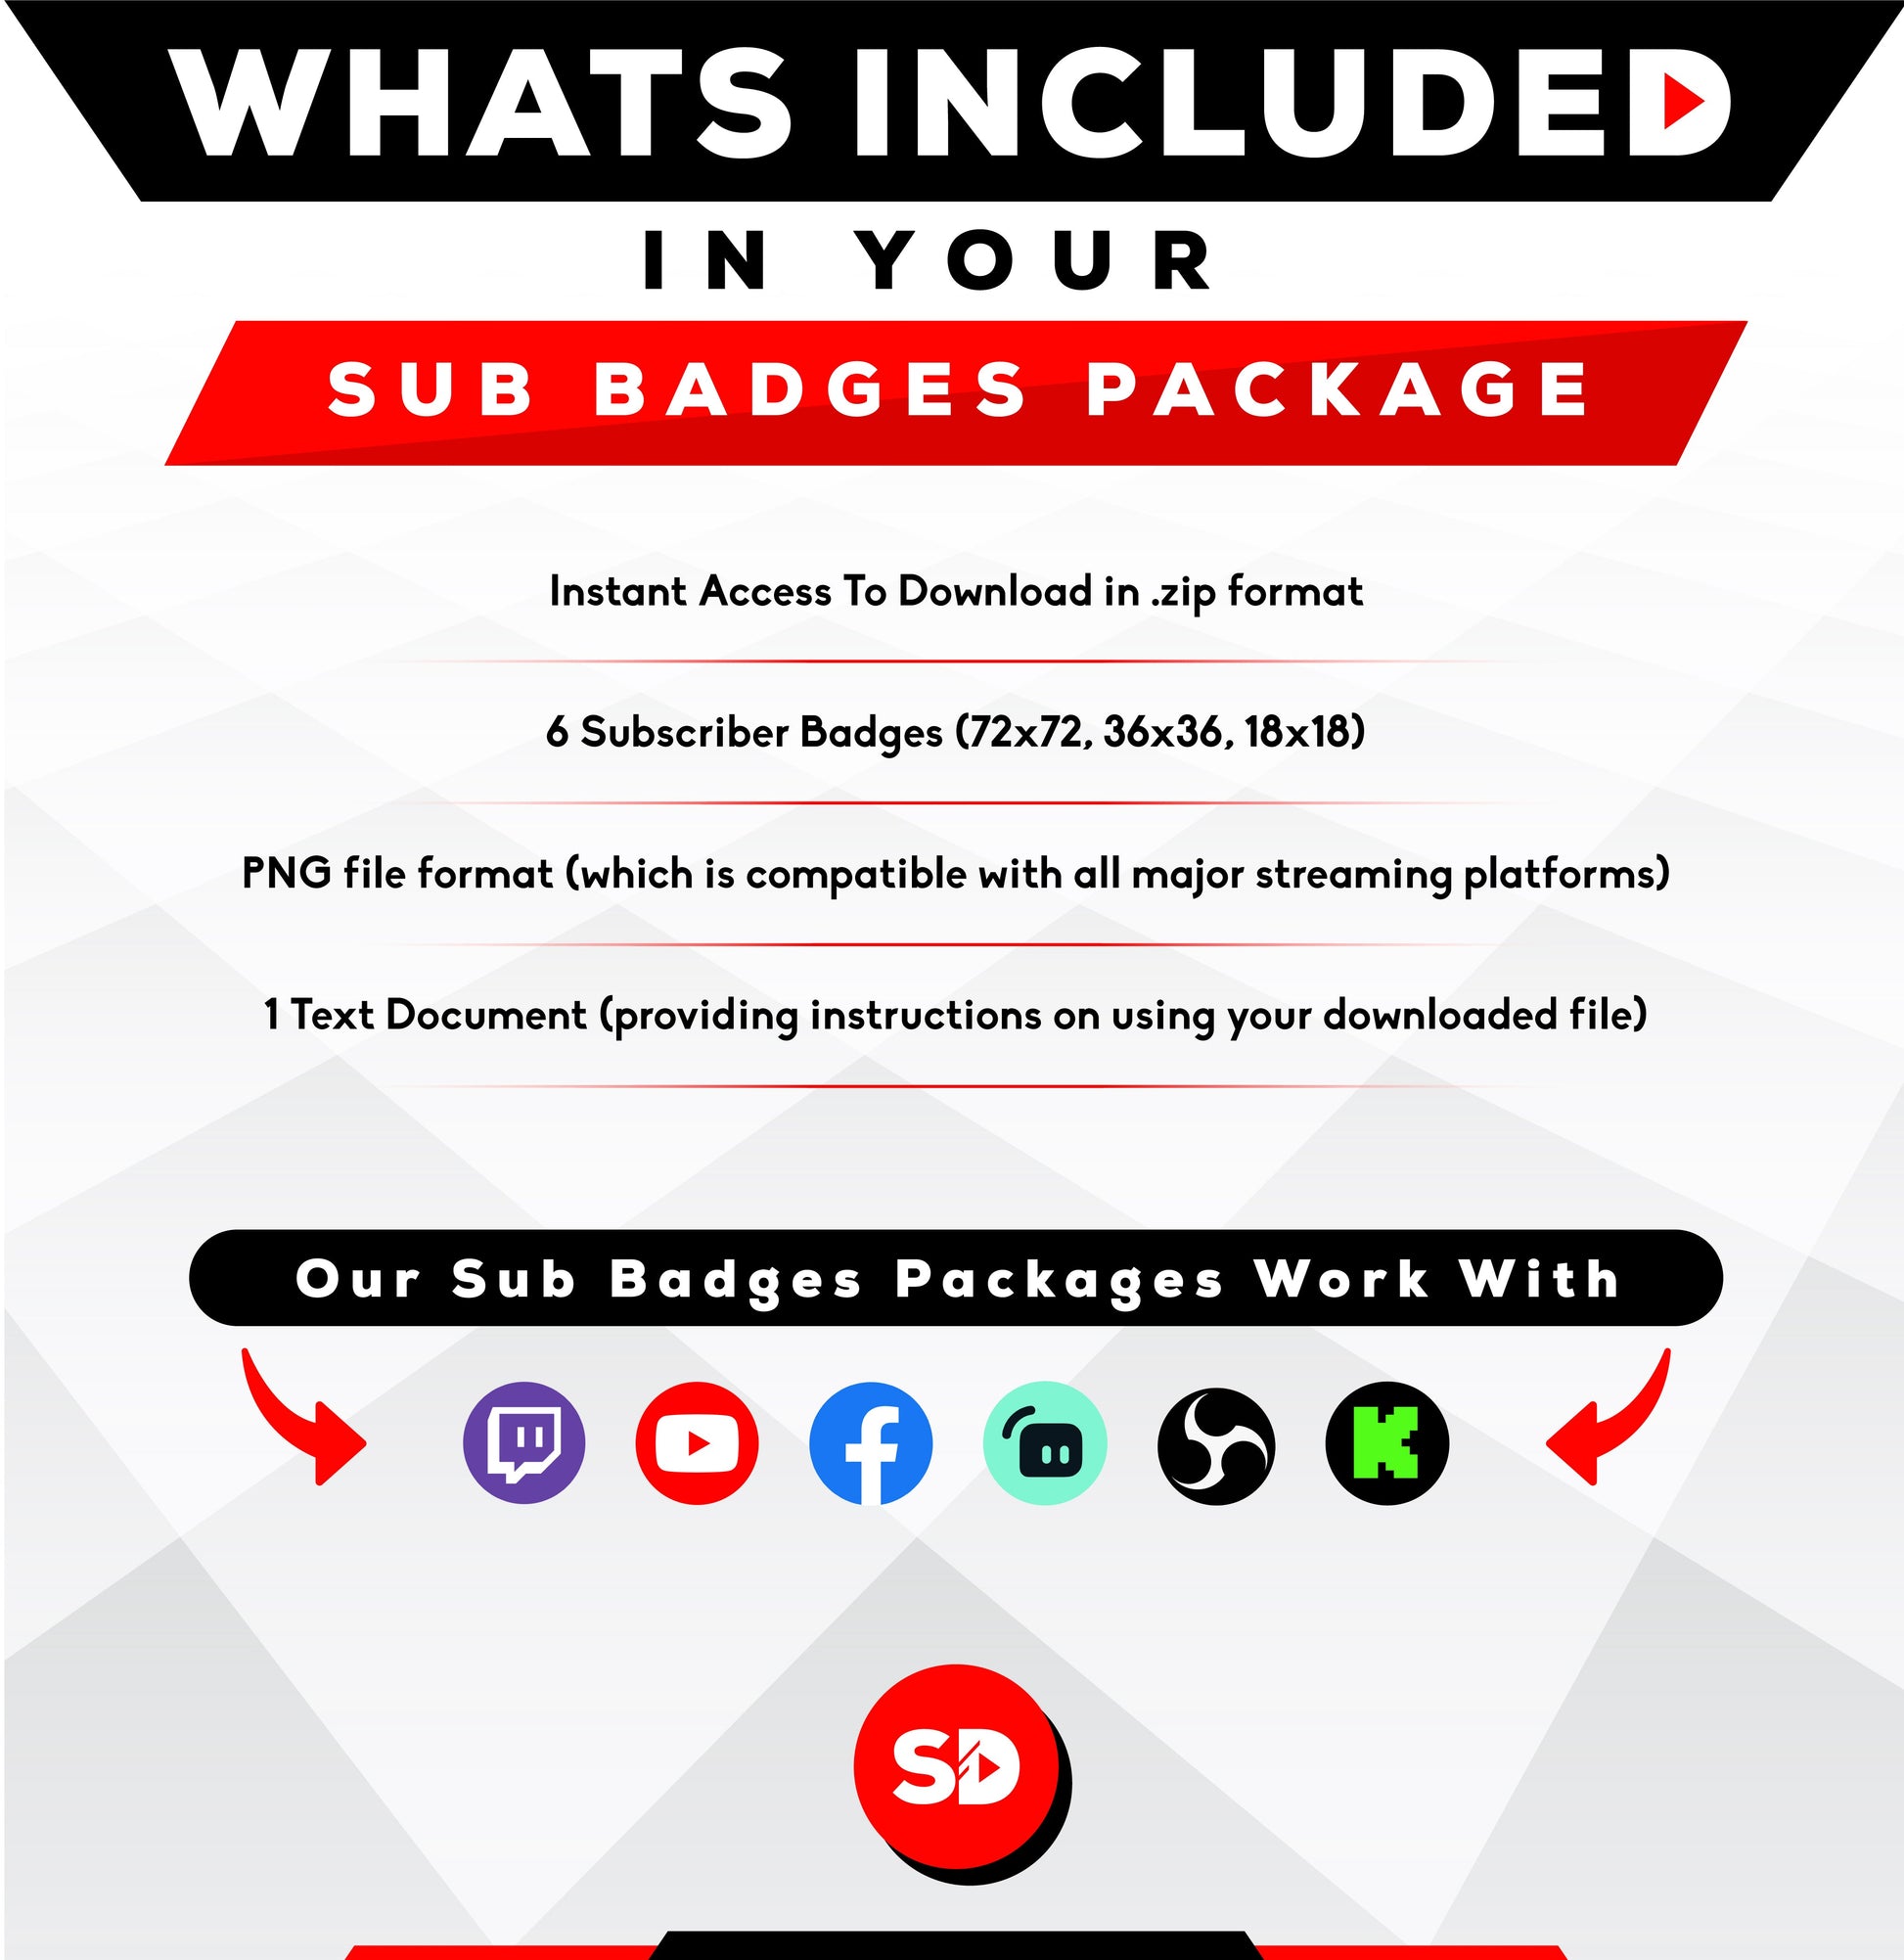 whats included in your package - sub badges - xbox controller - stream designz